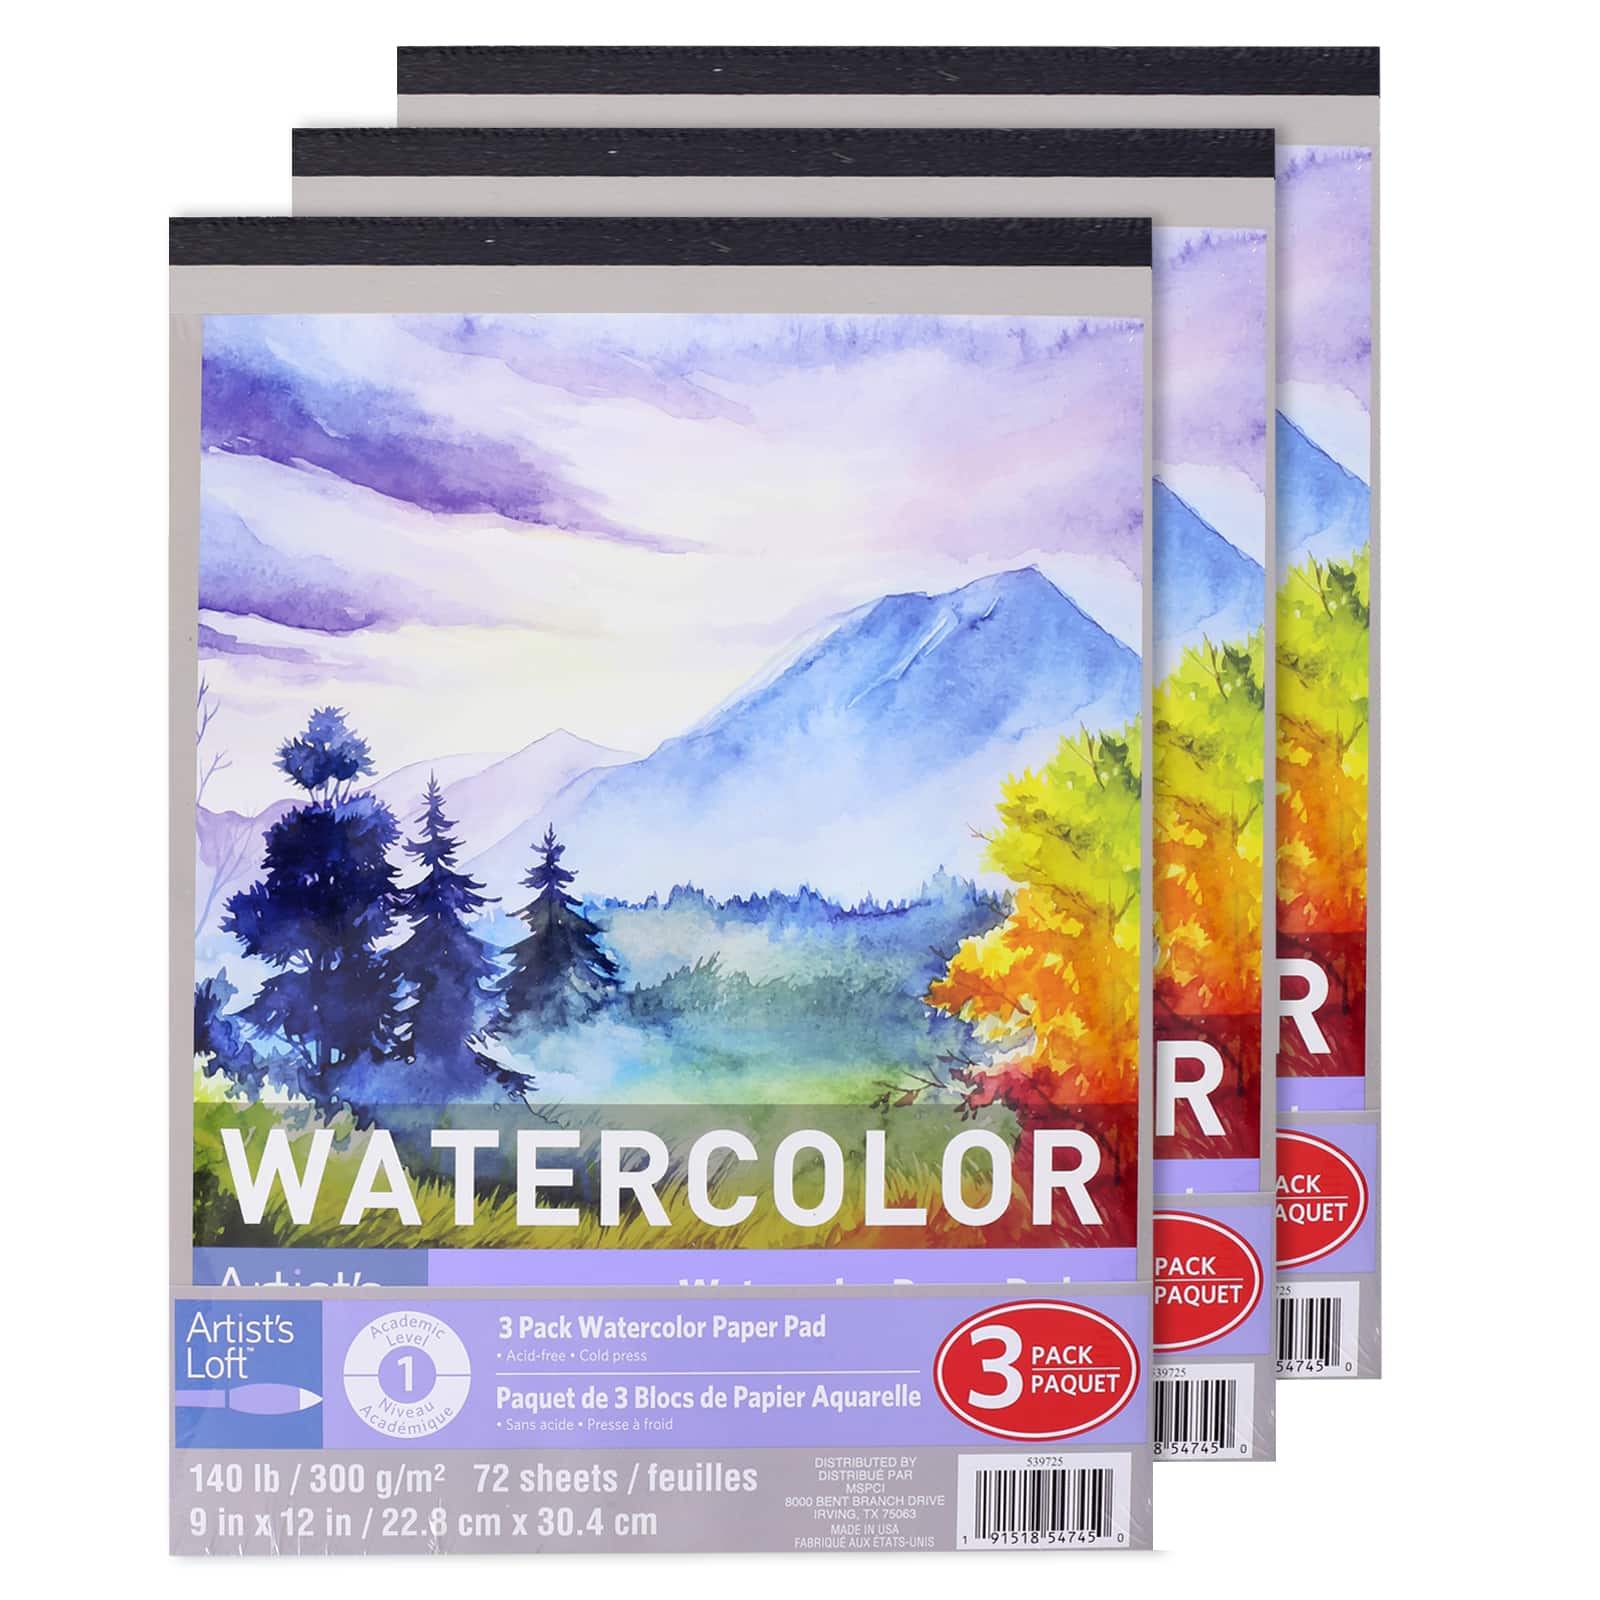 Shop For The 3-Pack Watercolor Paper Pad By Artist's Loft™ At Michaels